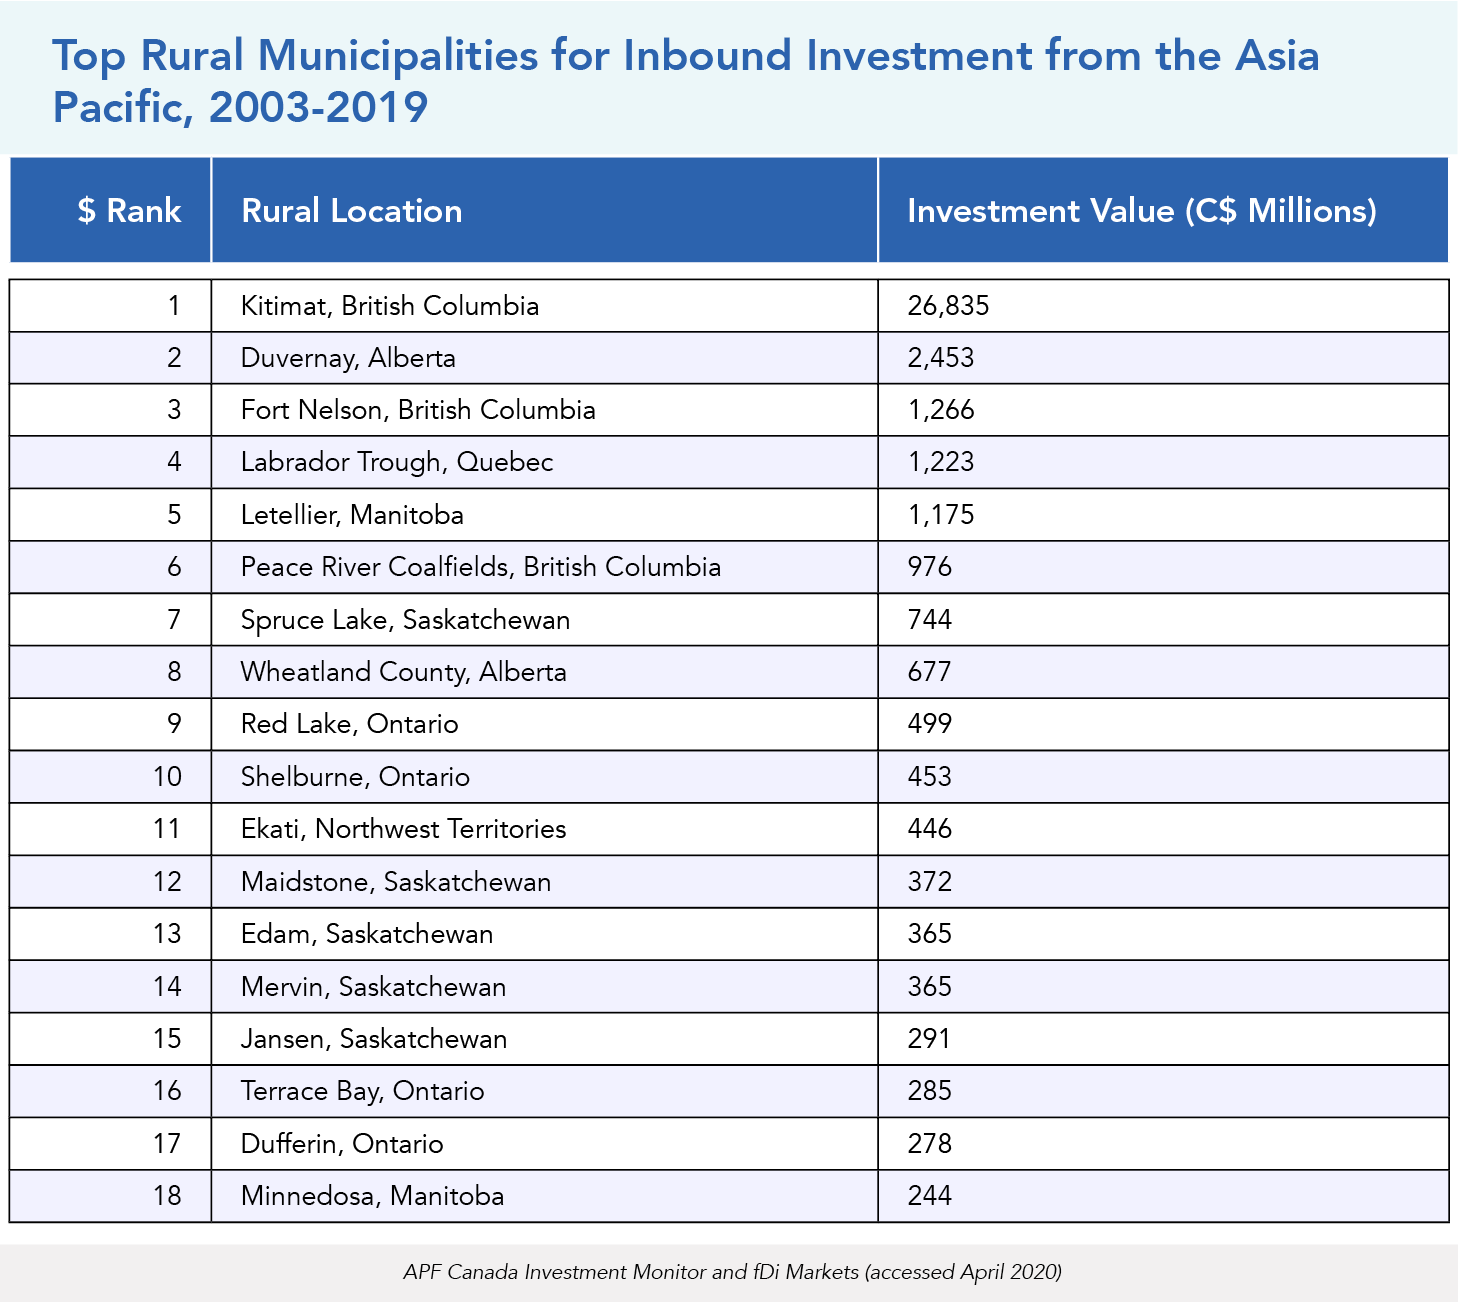 Top Rural Municipalities for Inbound Investment from the Asia Pacific, 2003-2019